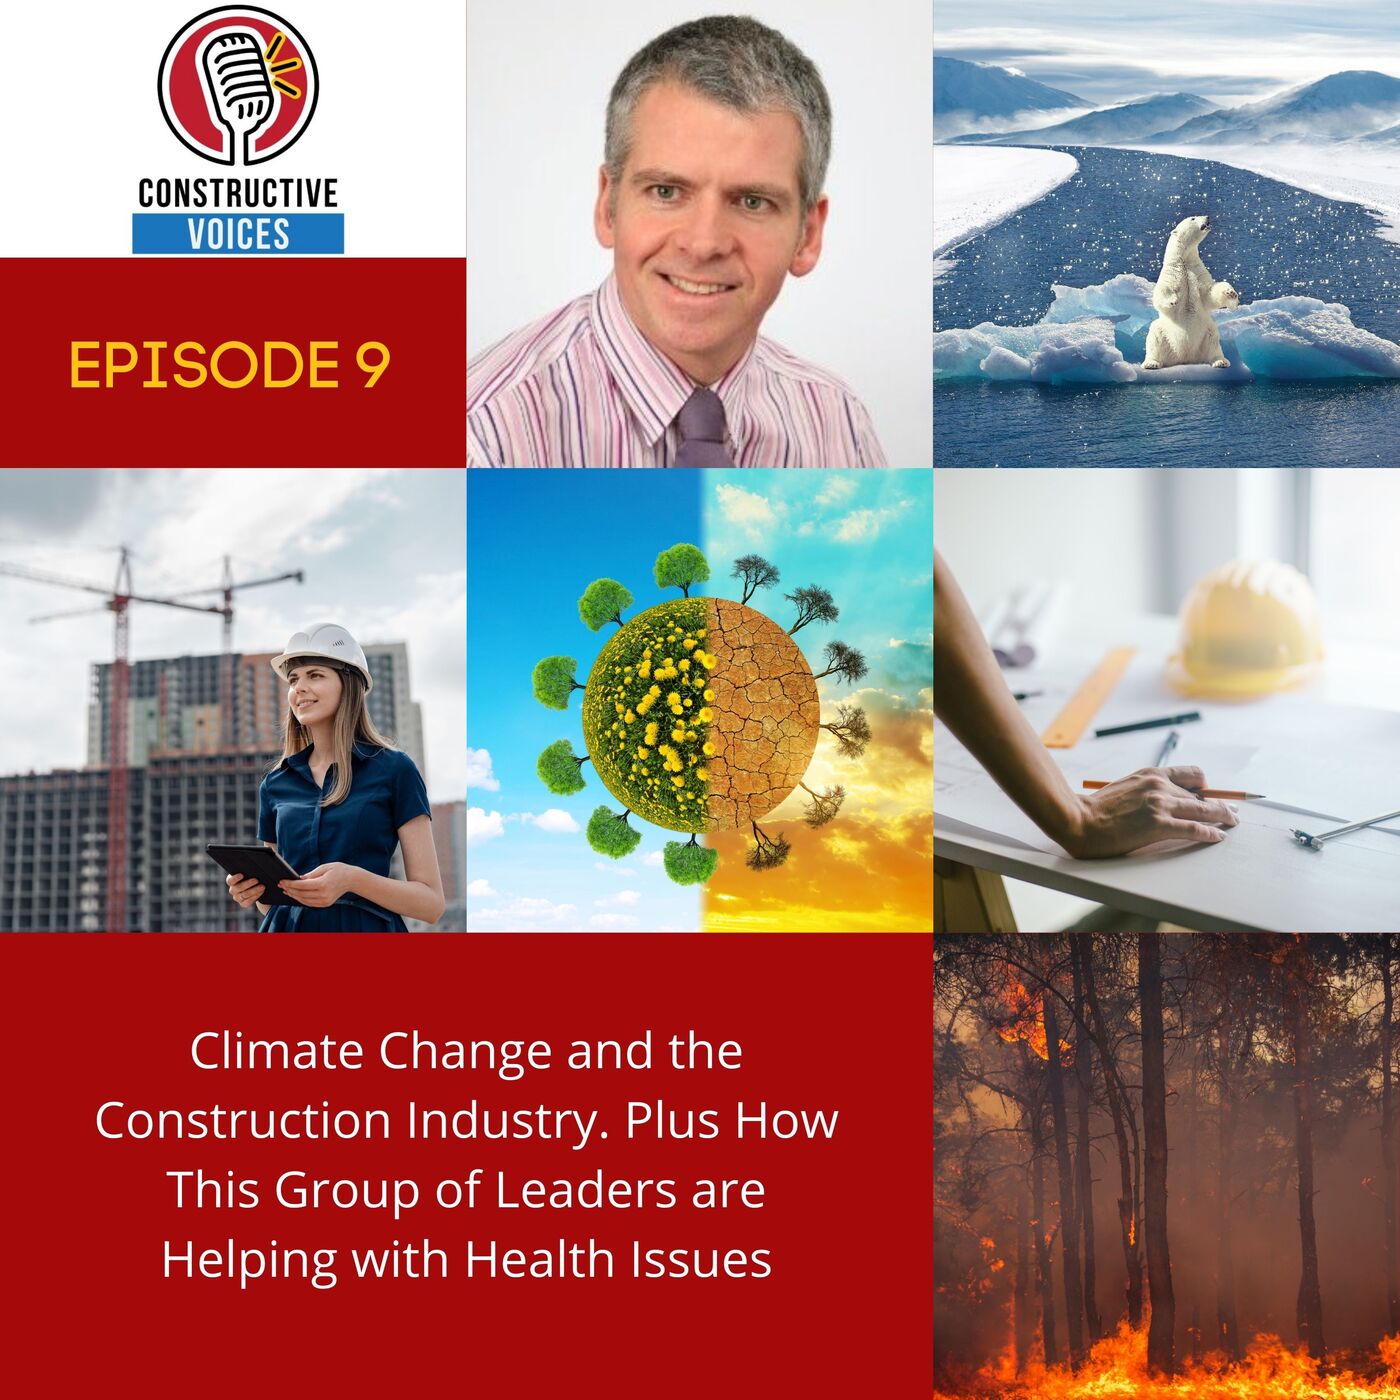 Climate Change and the Construction Industry. Plus How This Group of Leaders are Helping with Health Issues